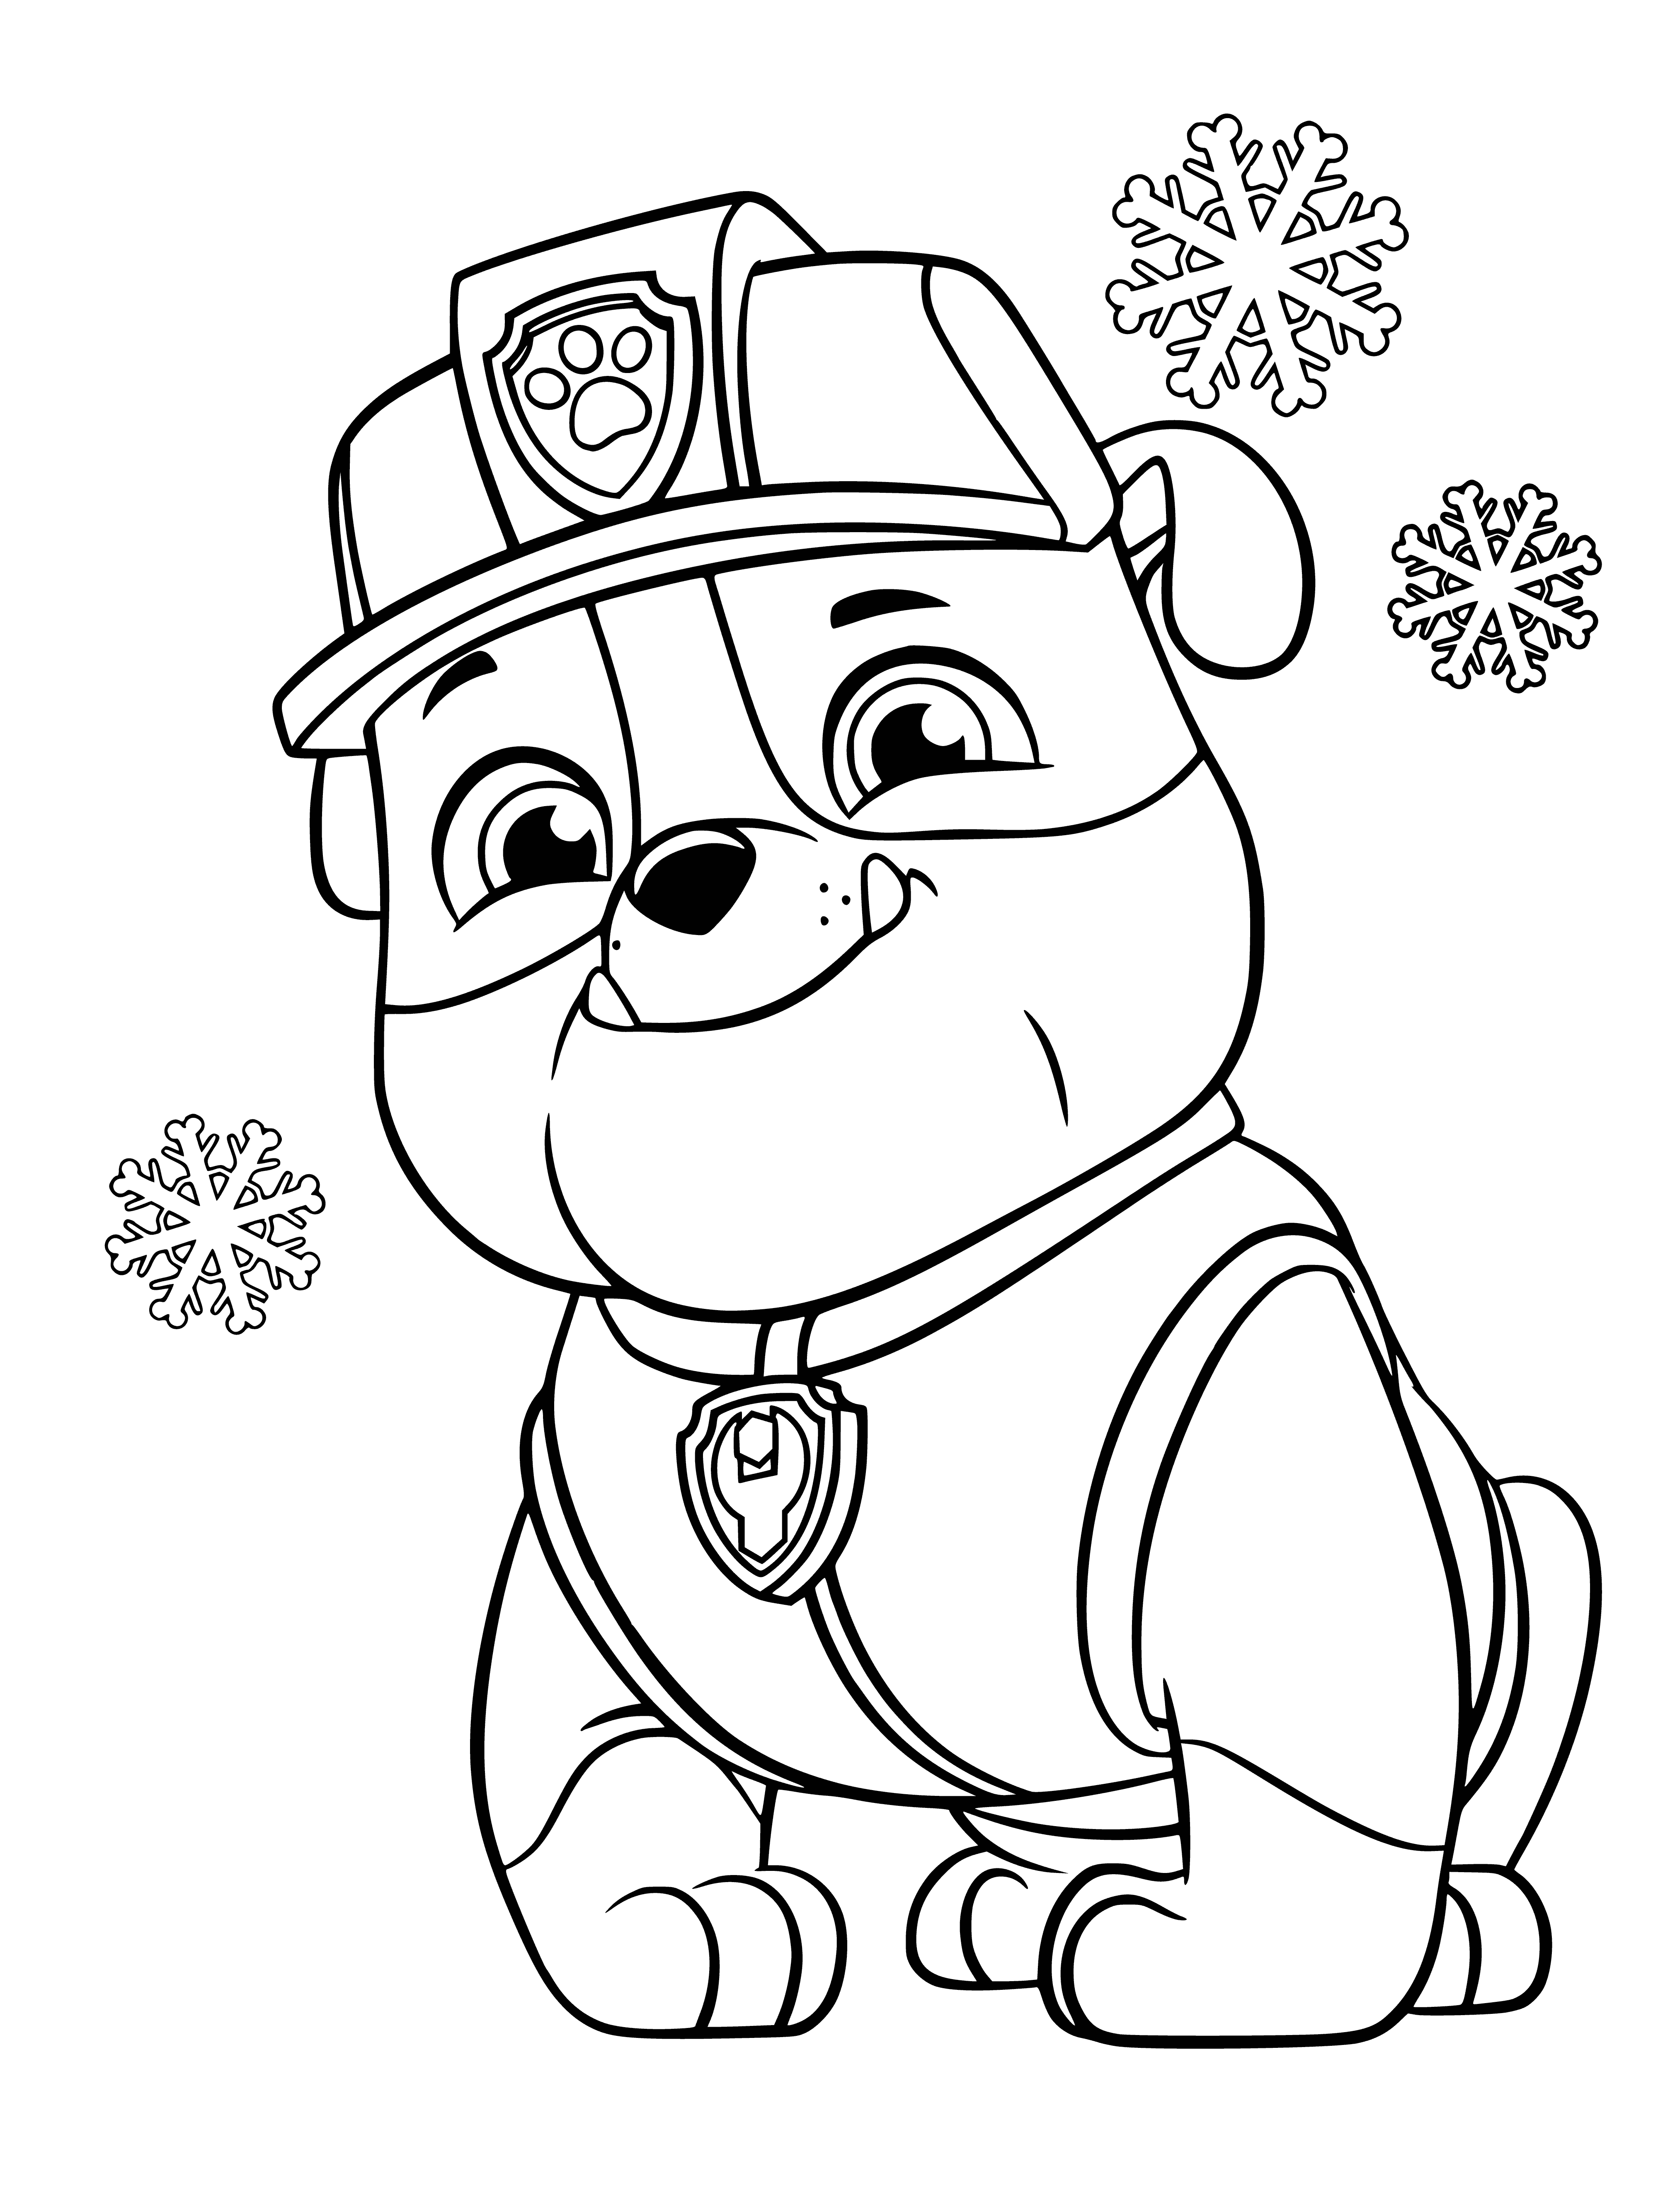 coloring page: Kids can have fun with PAW Patrol - Fortress: fort, slide, climbing wall, & ball pit!